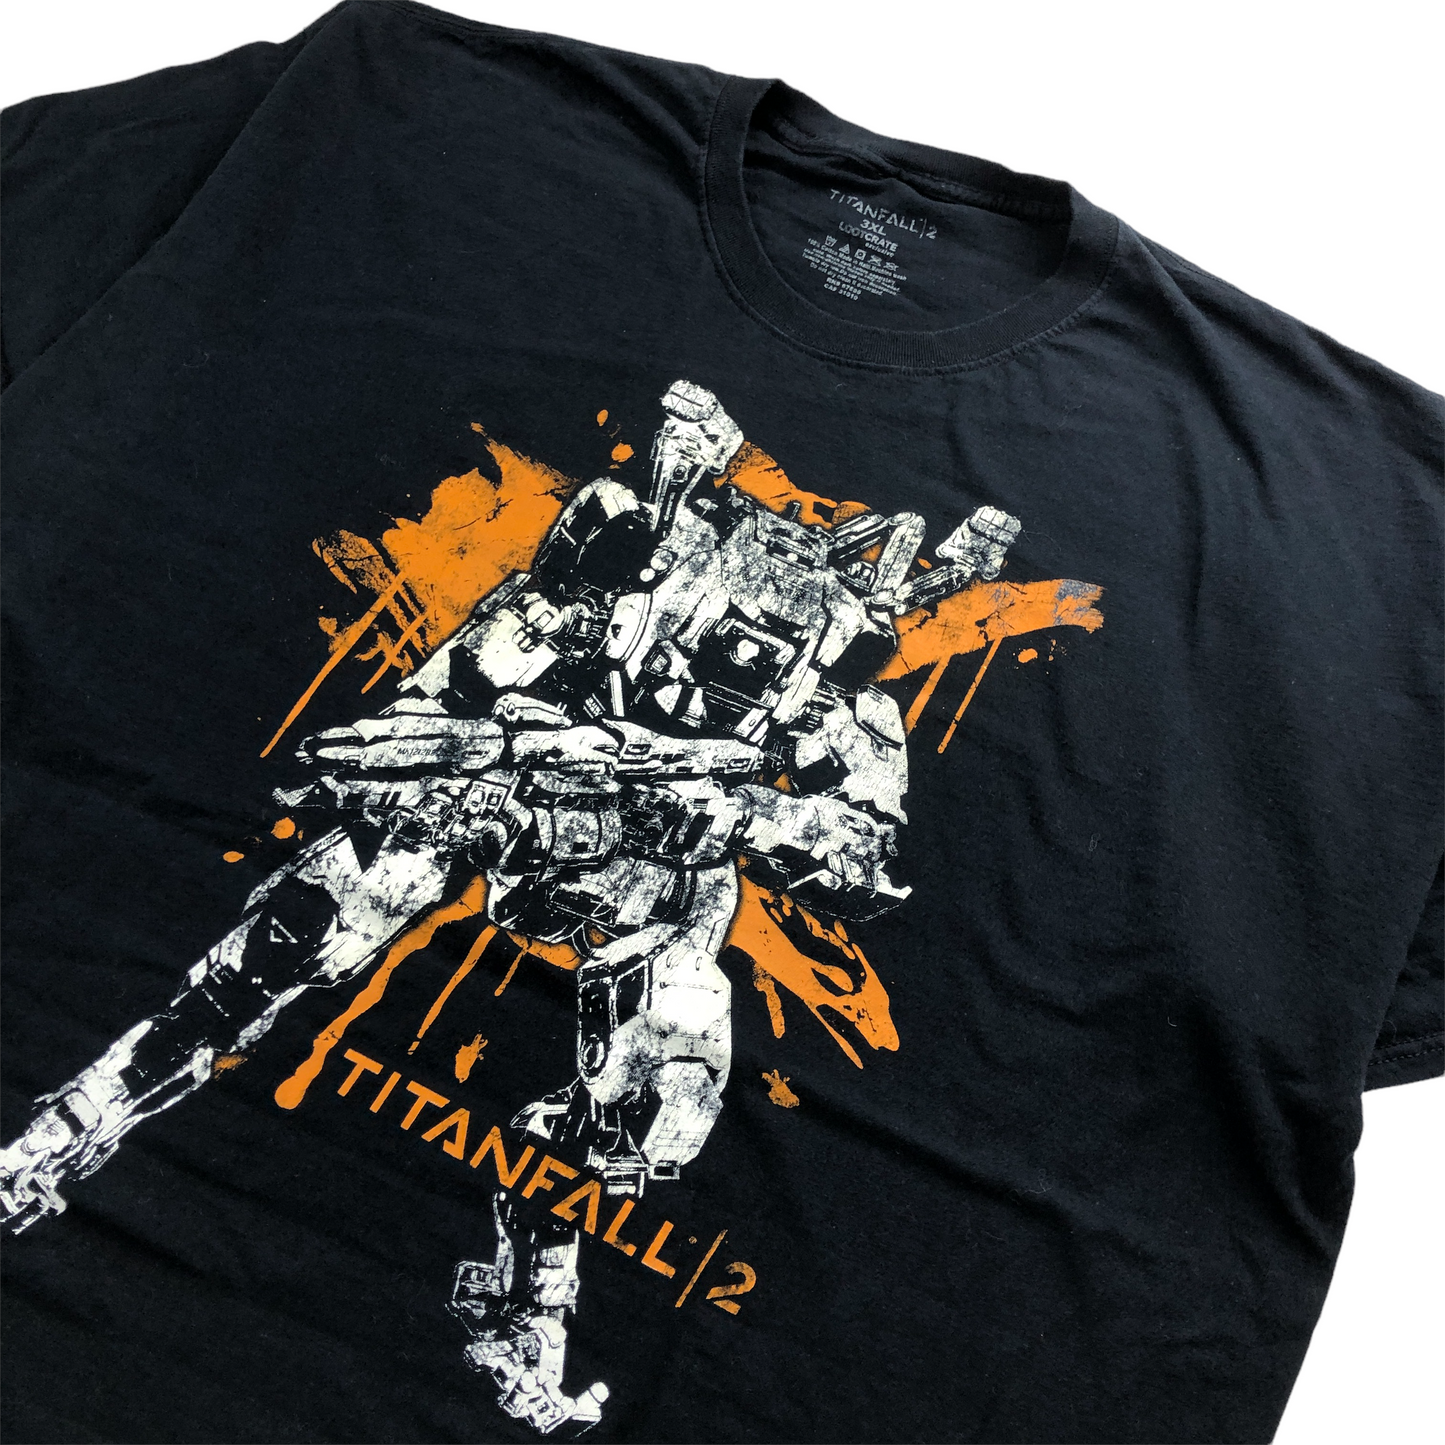 LOOT CRATE TITANFALL Tシャツ 半袖 カットソー ビッグプリント